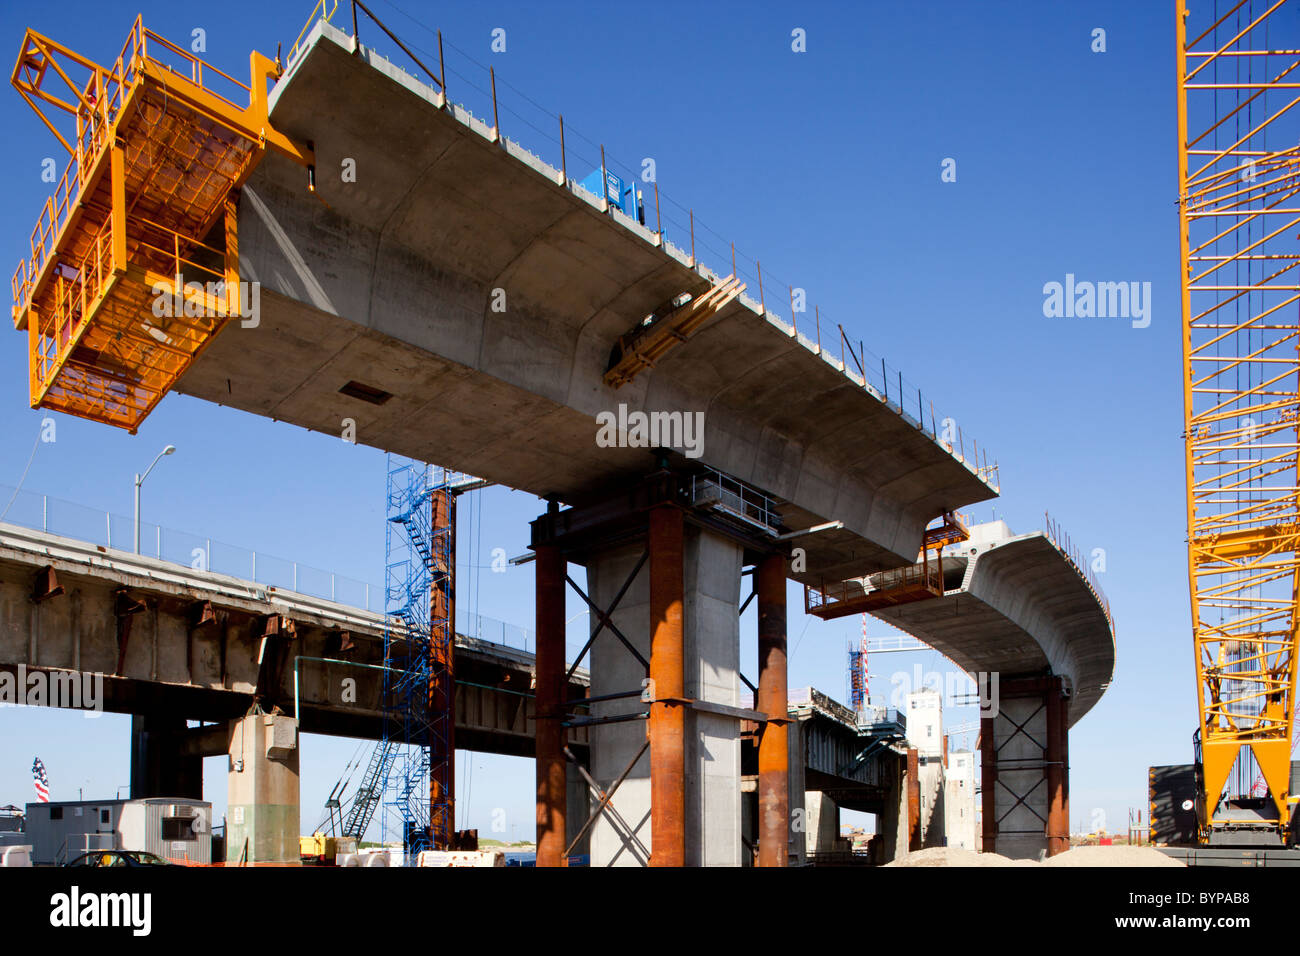 USA, New Jersey, Perth Amboy, Partially completed bridge construction site along Jersey Shore Stock Photo